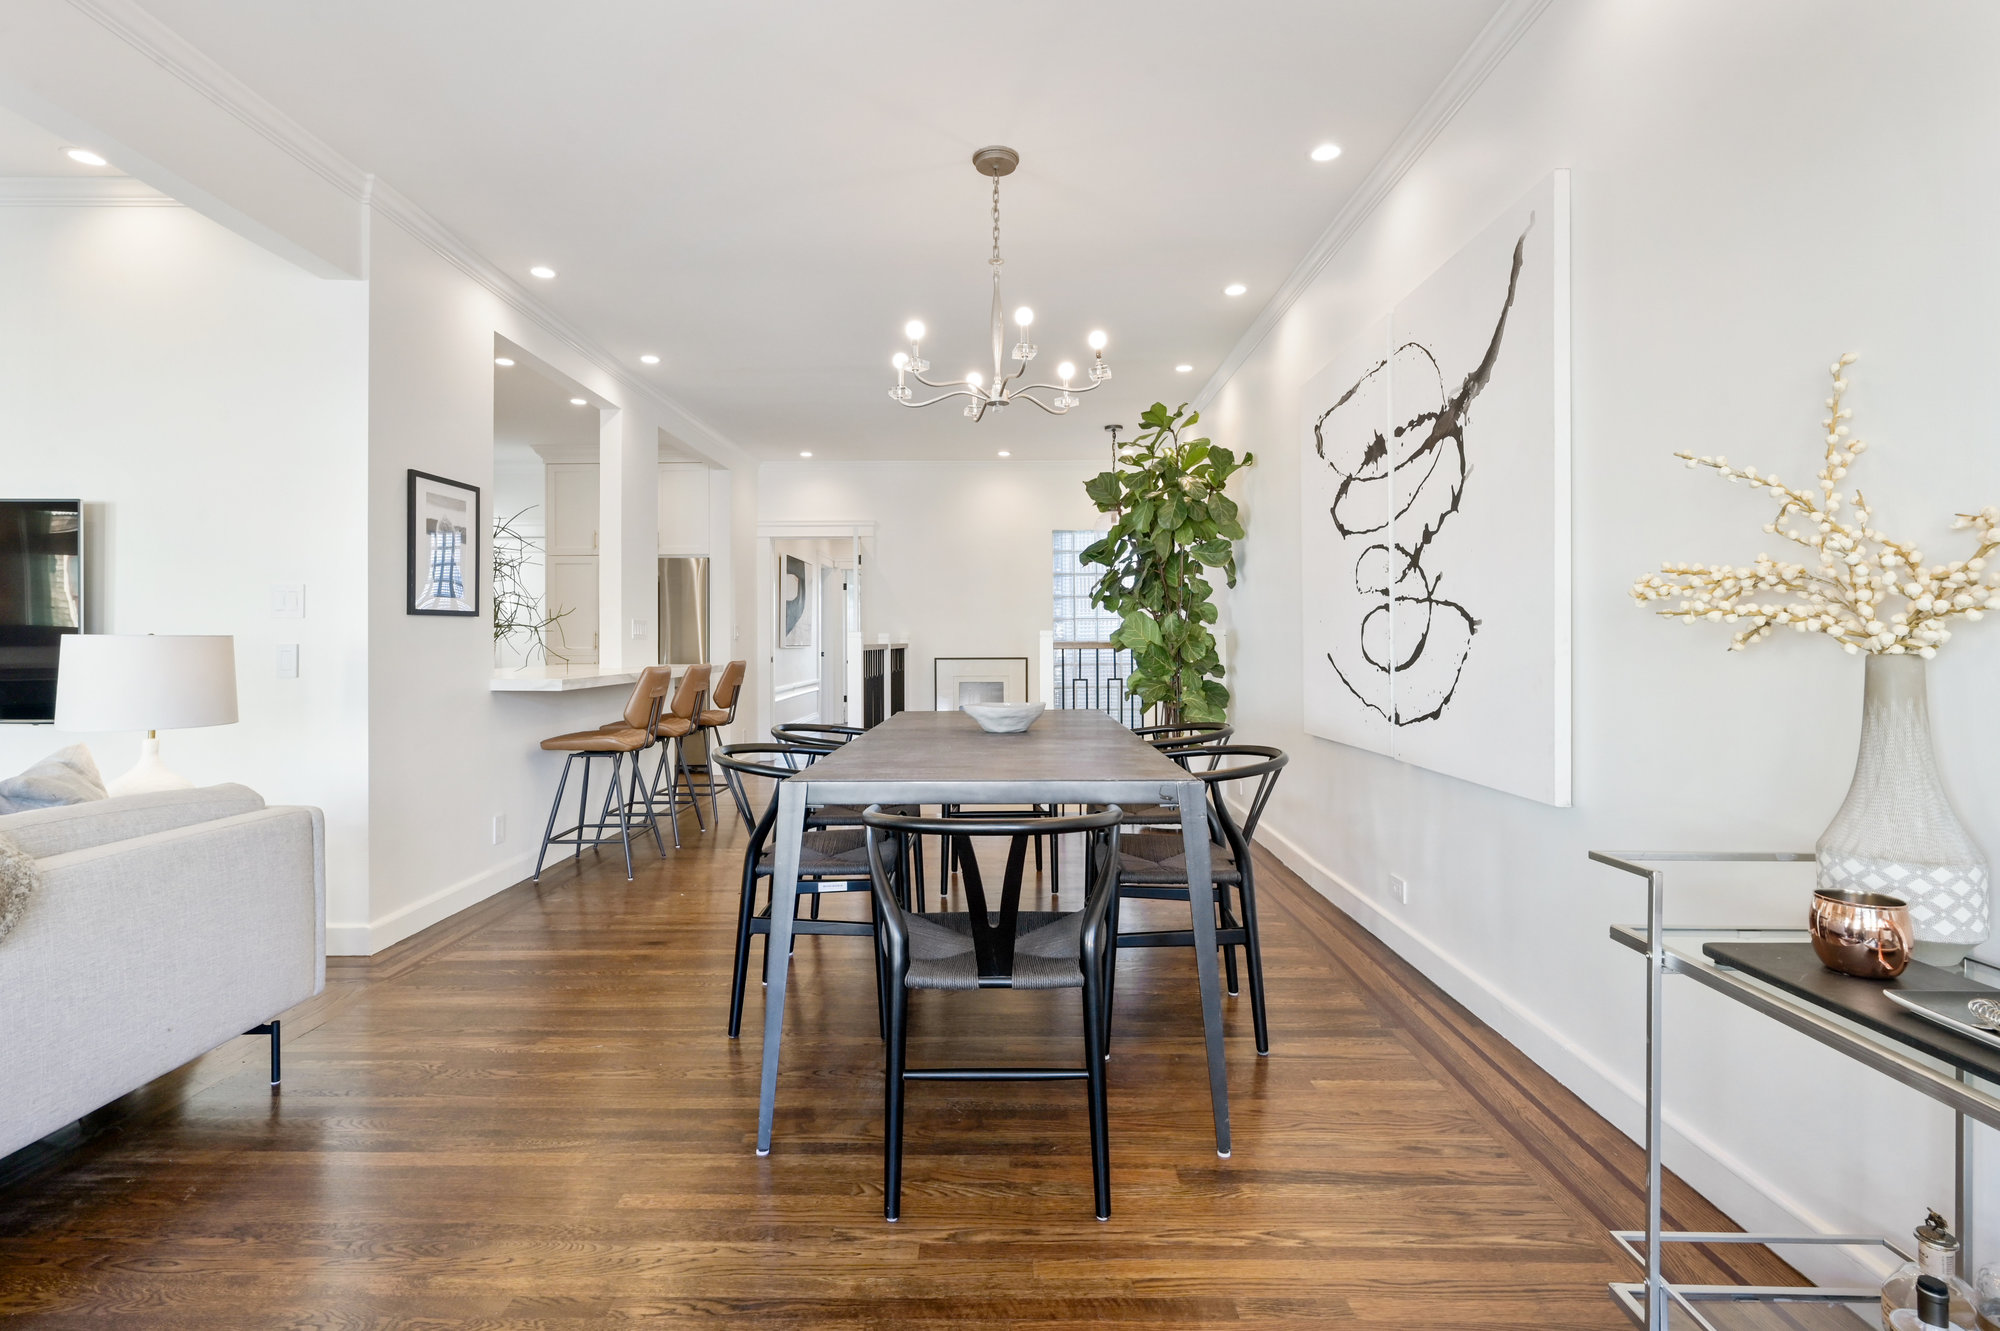 Property Photo: View of the dining area, featuring tall ceilings and wood floors